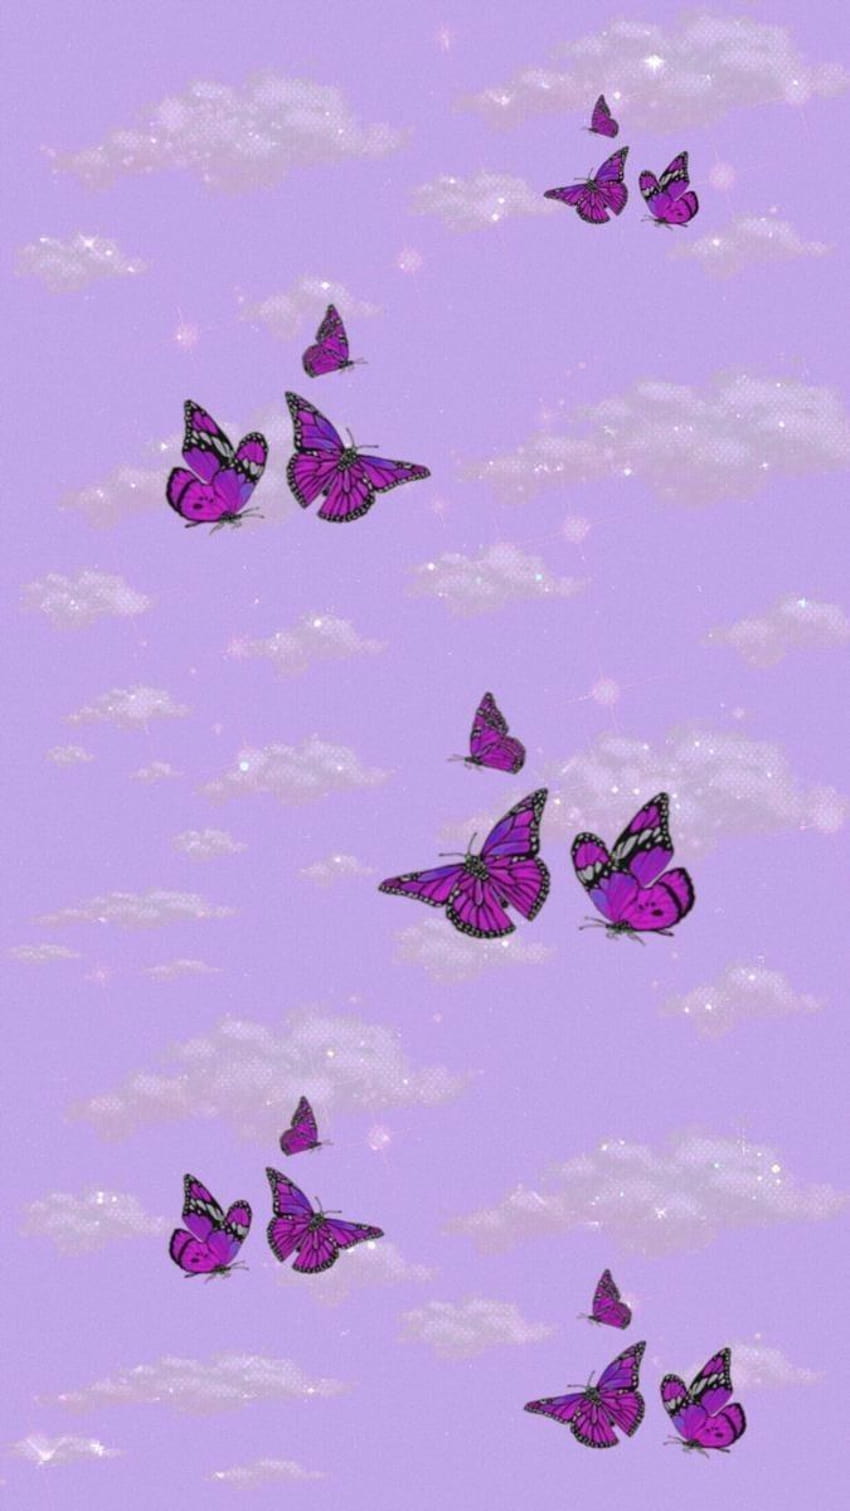 Aesthetic Sparkles Purple Butterflies posted by Michelle Johnson, iphone purple butterfly HD phone wallpaper